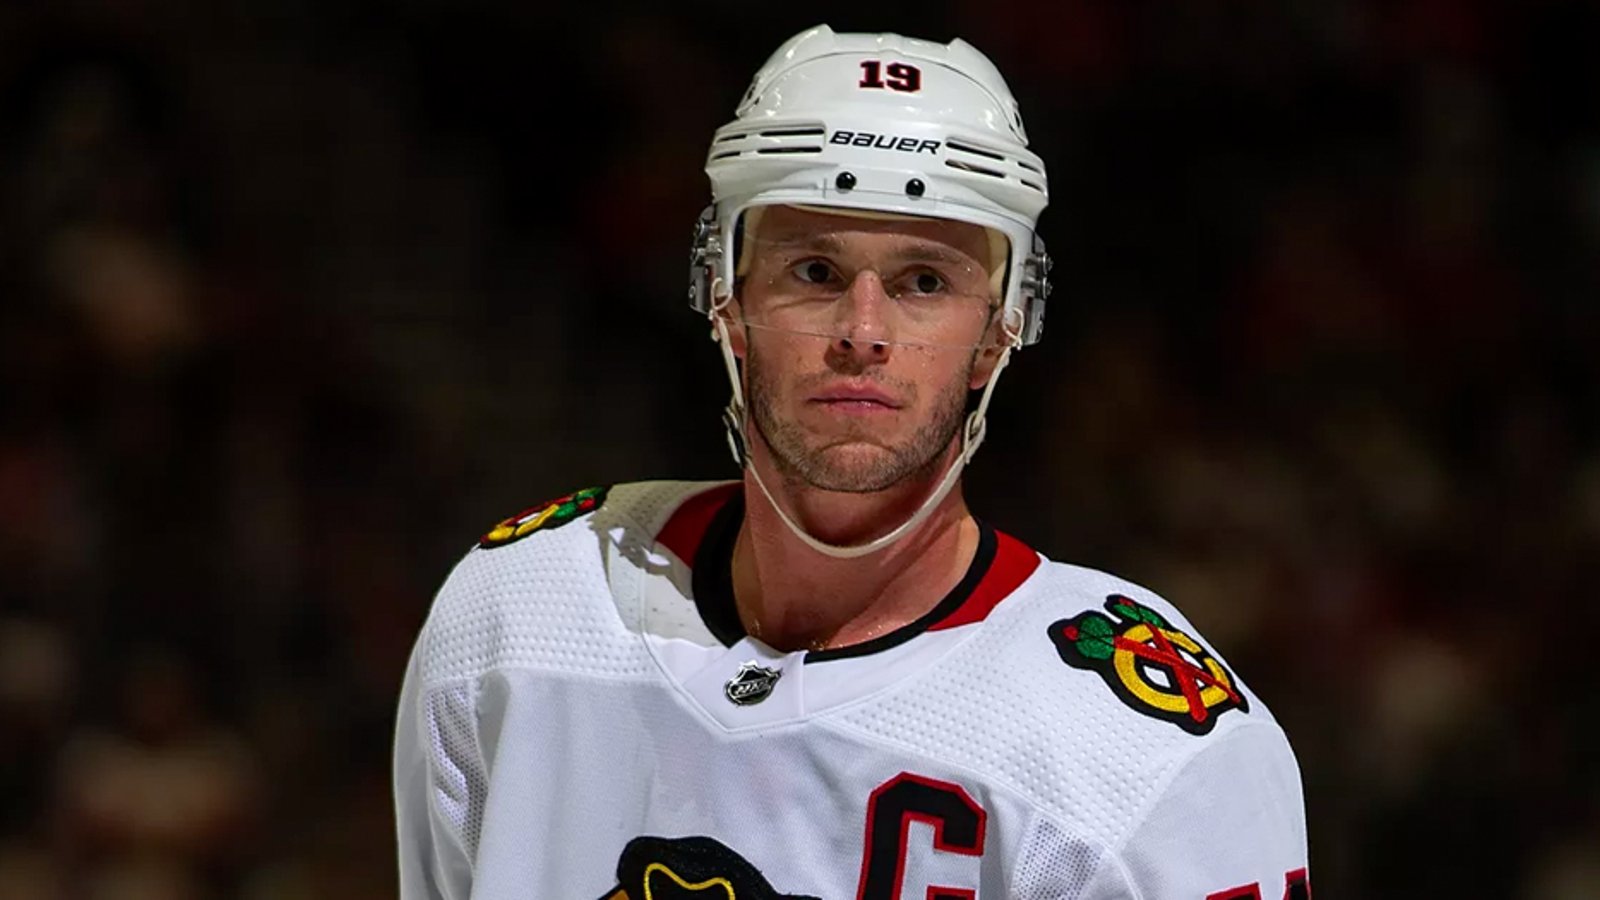 Jonathan Toews stuns the hockey world with a stirring call to arms